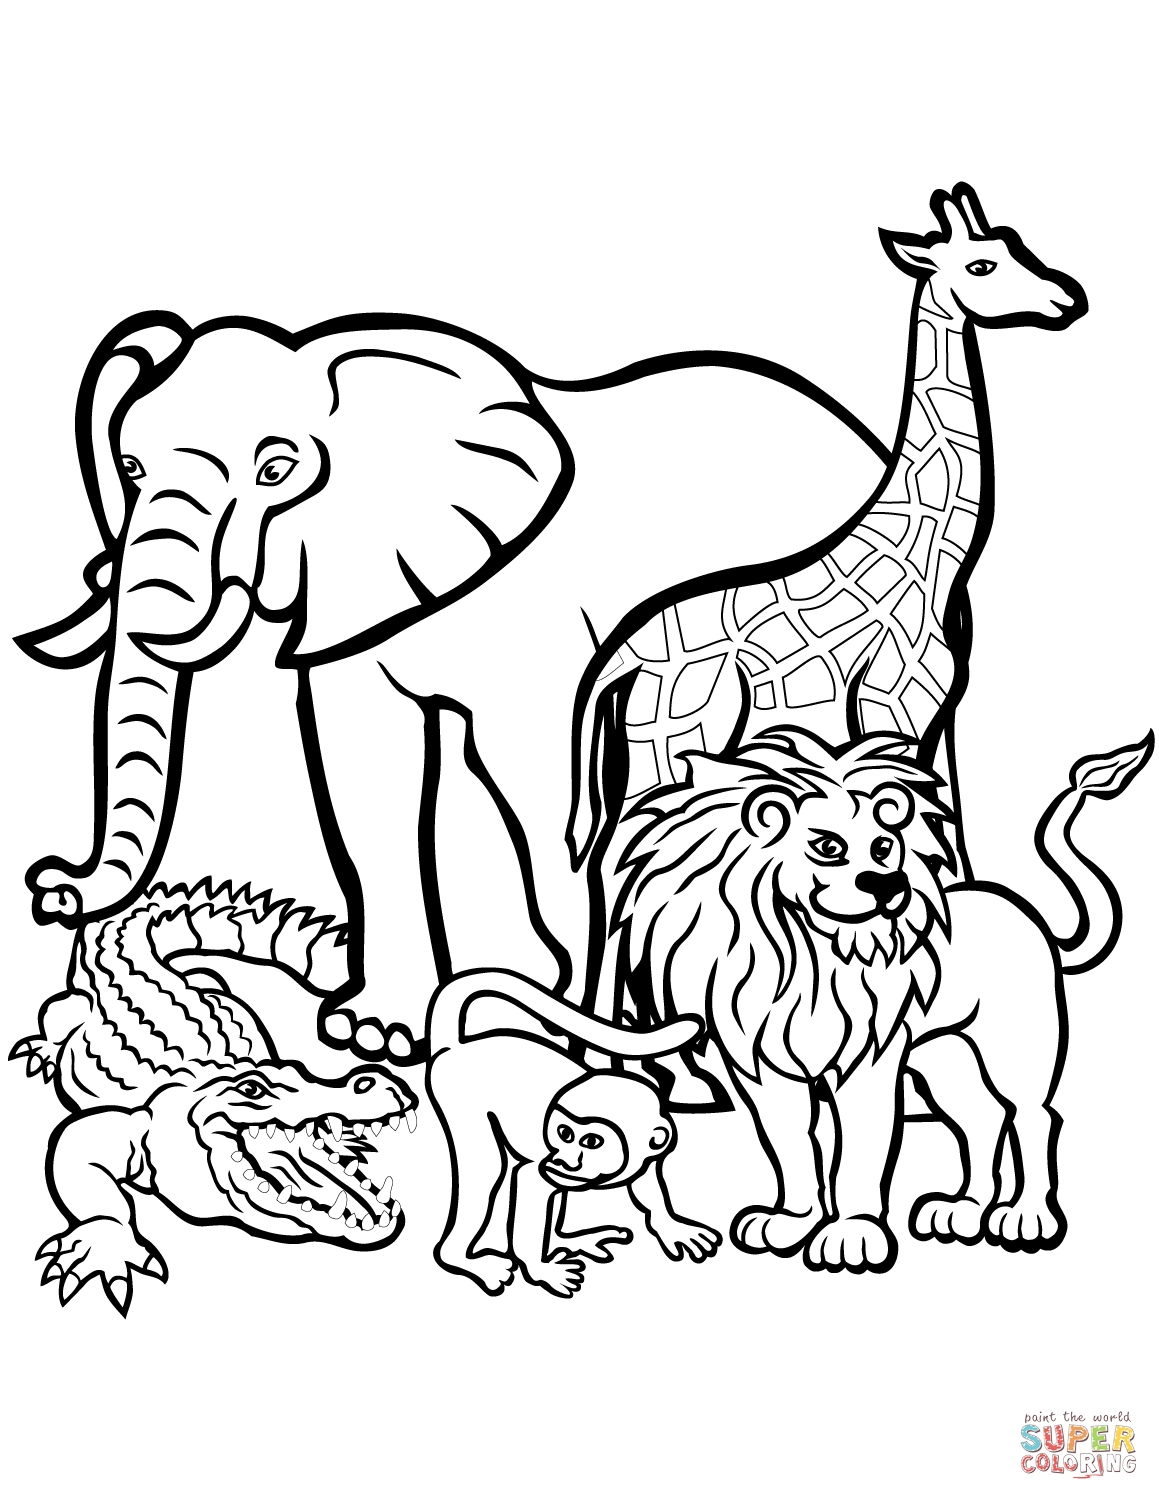 Zoo Animal Coloring Pages For Toddlers at GetDrawings ...